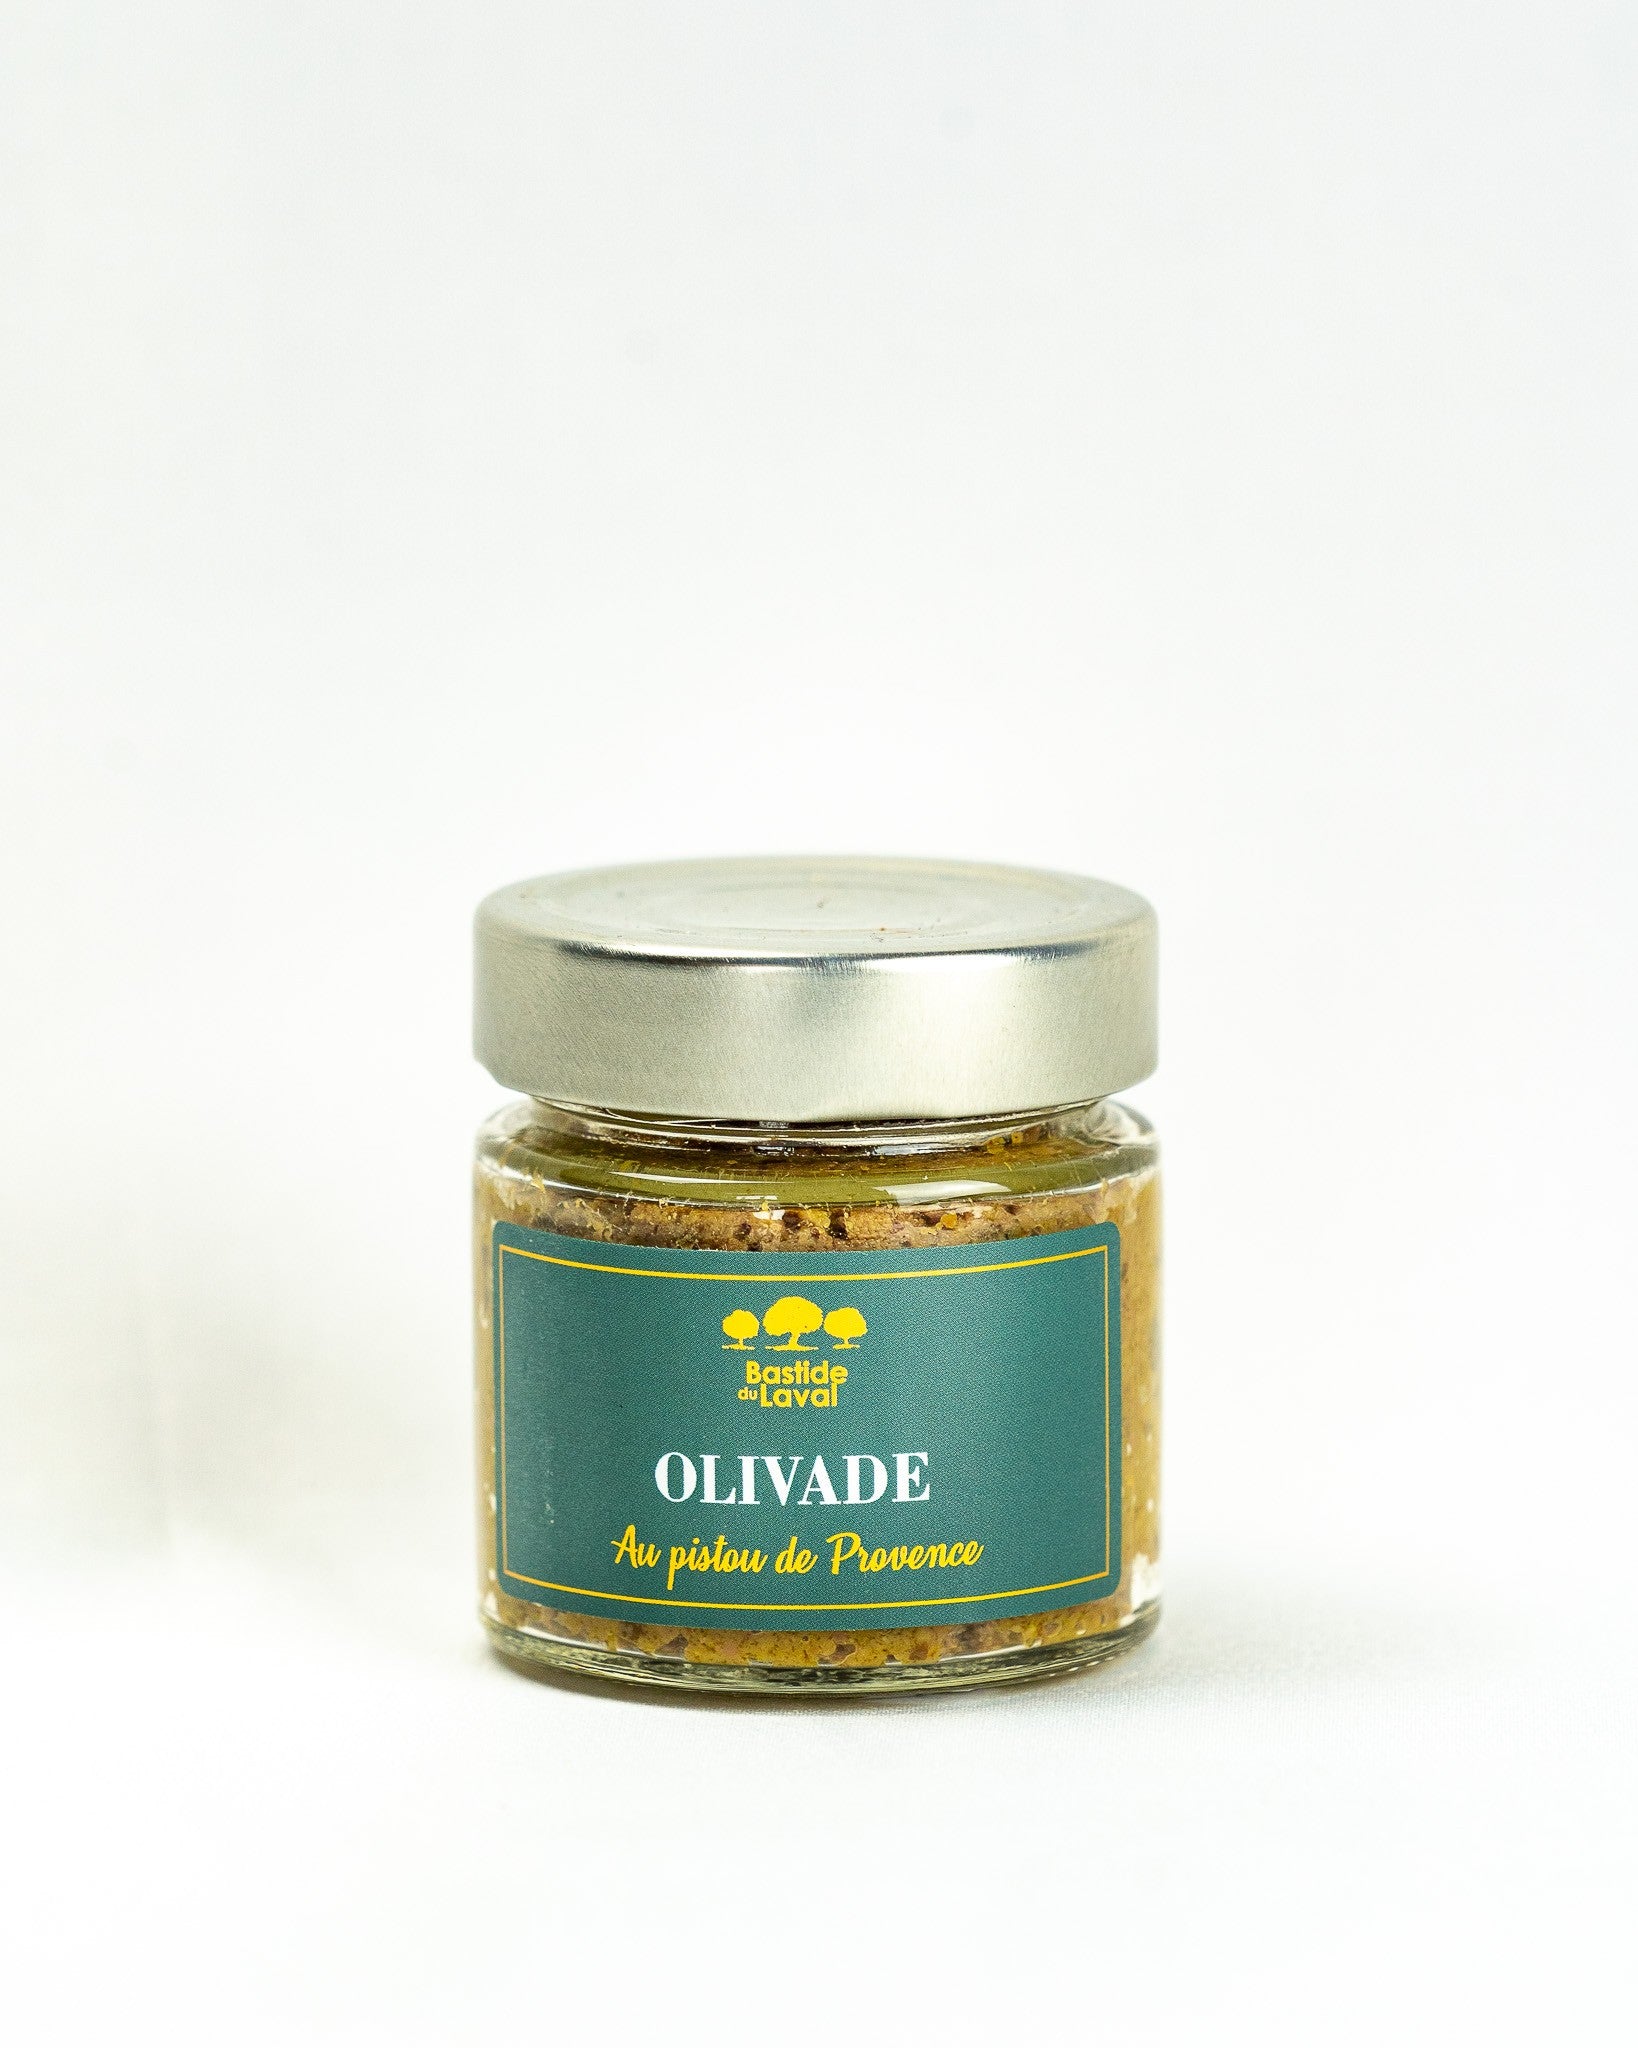 Olivade with Pistou